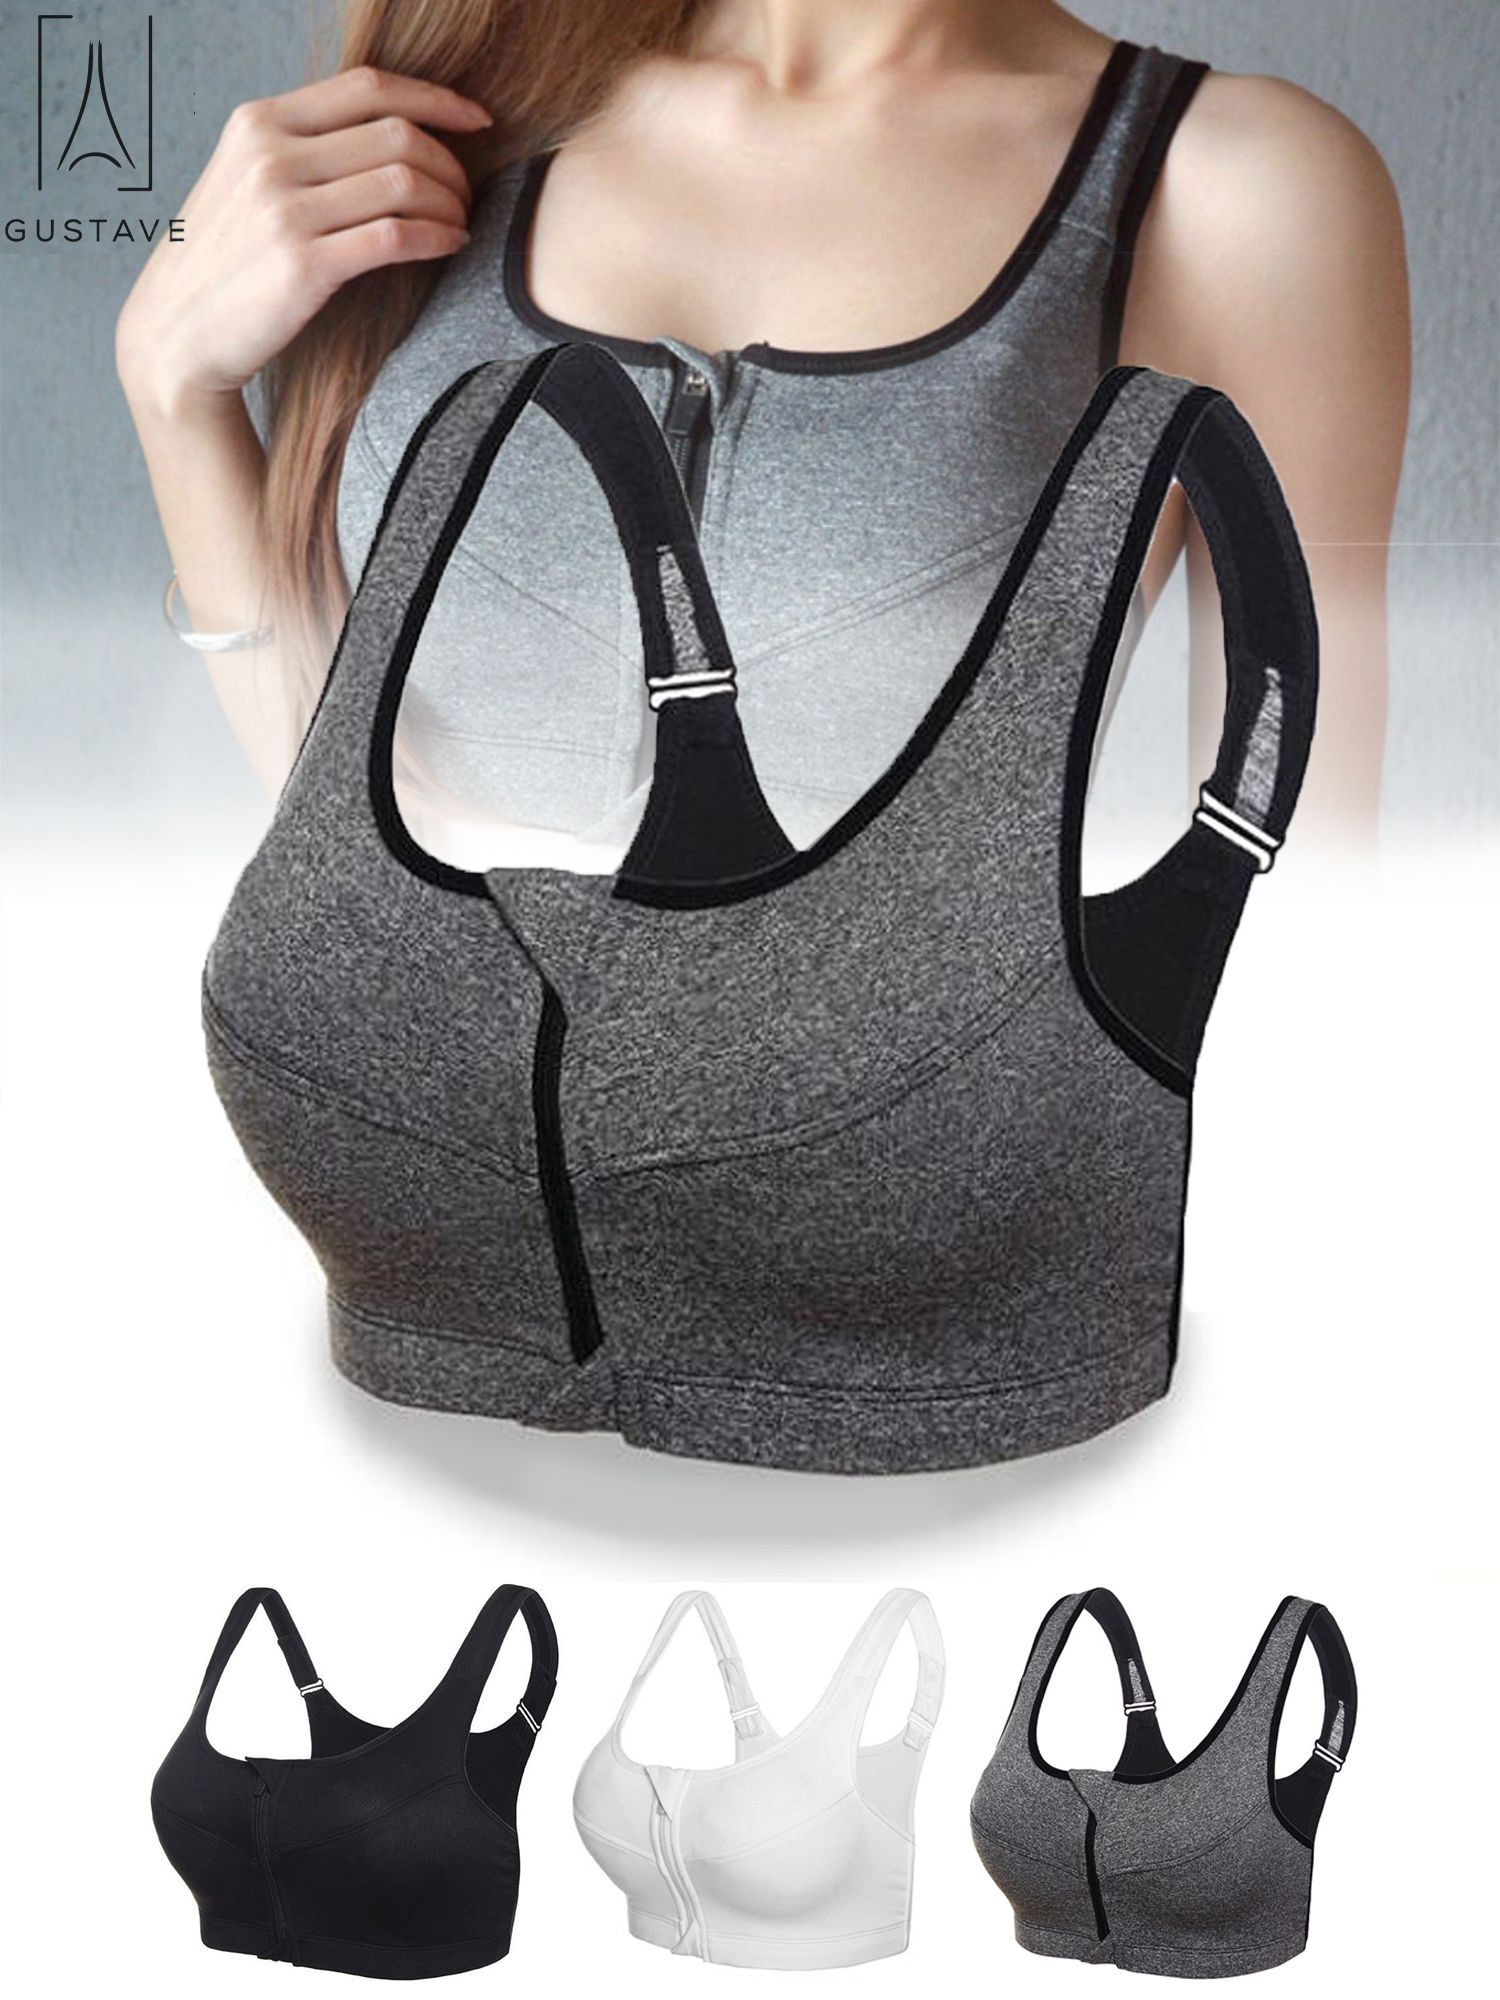 Gustave Women High Impact Front Zip Sports Bra Push Up Padded Workout Yoga Bras Wirefree Shockproof Fitness Vest Tops "Gray,L" - image 1 of 10